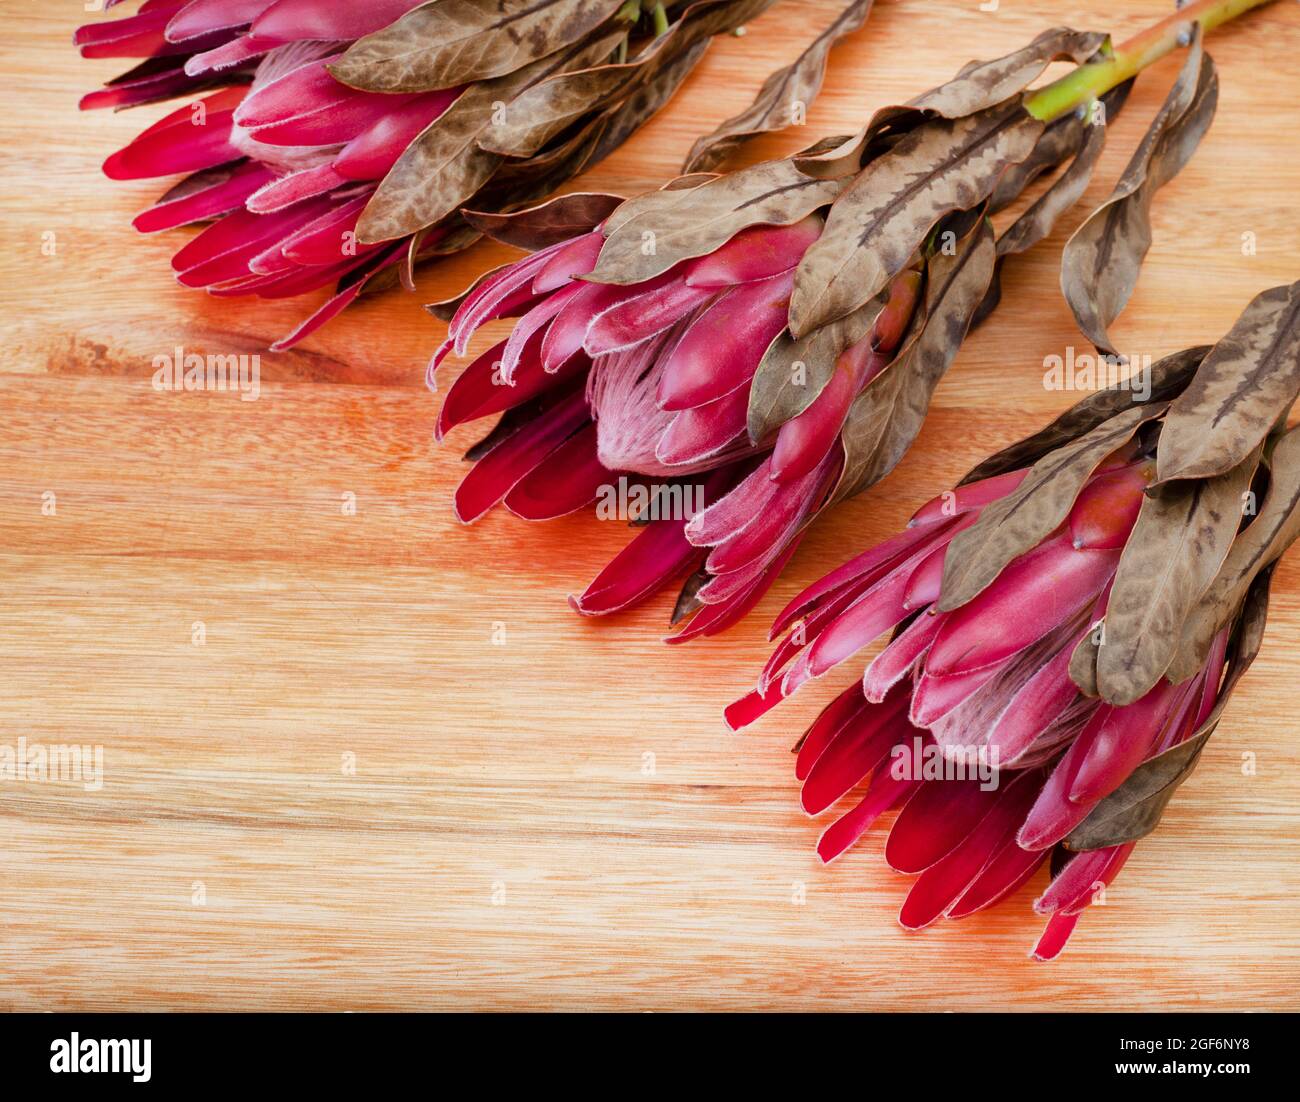 South African protea flowers on a rustic surface Stock Photo